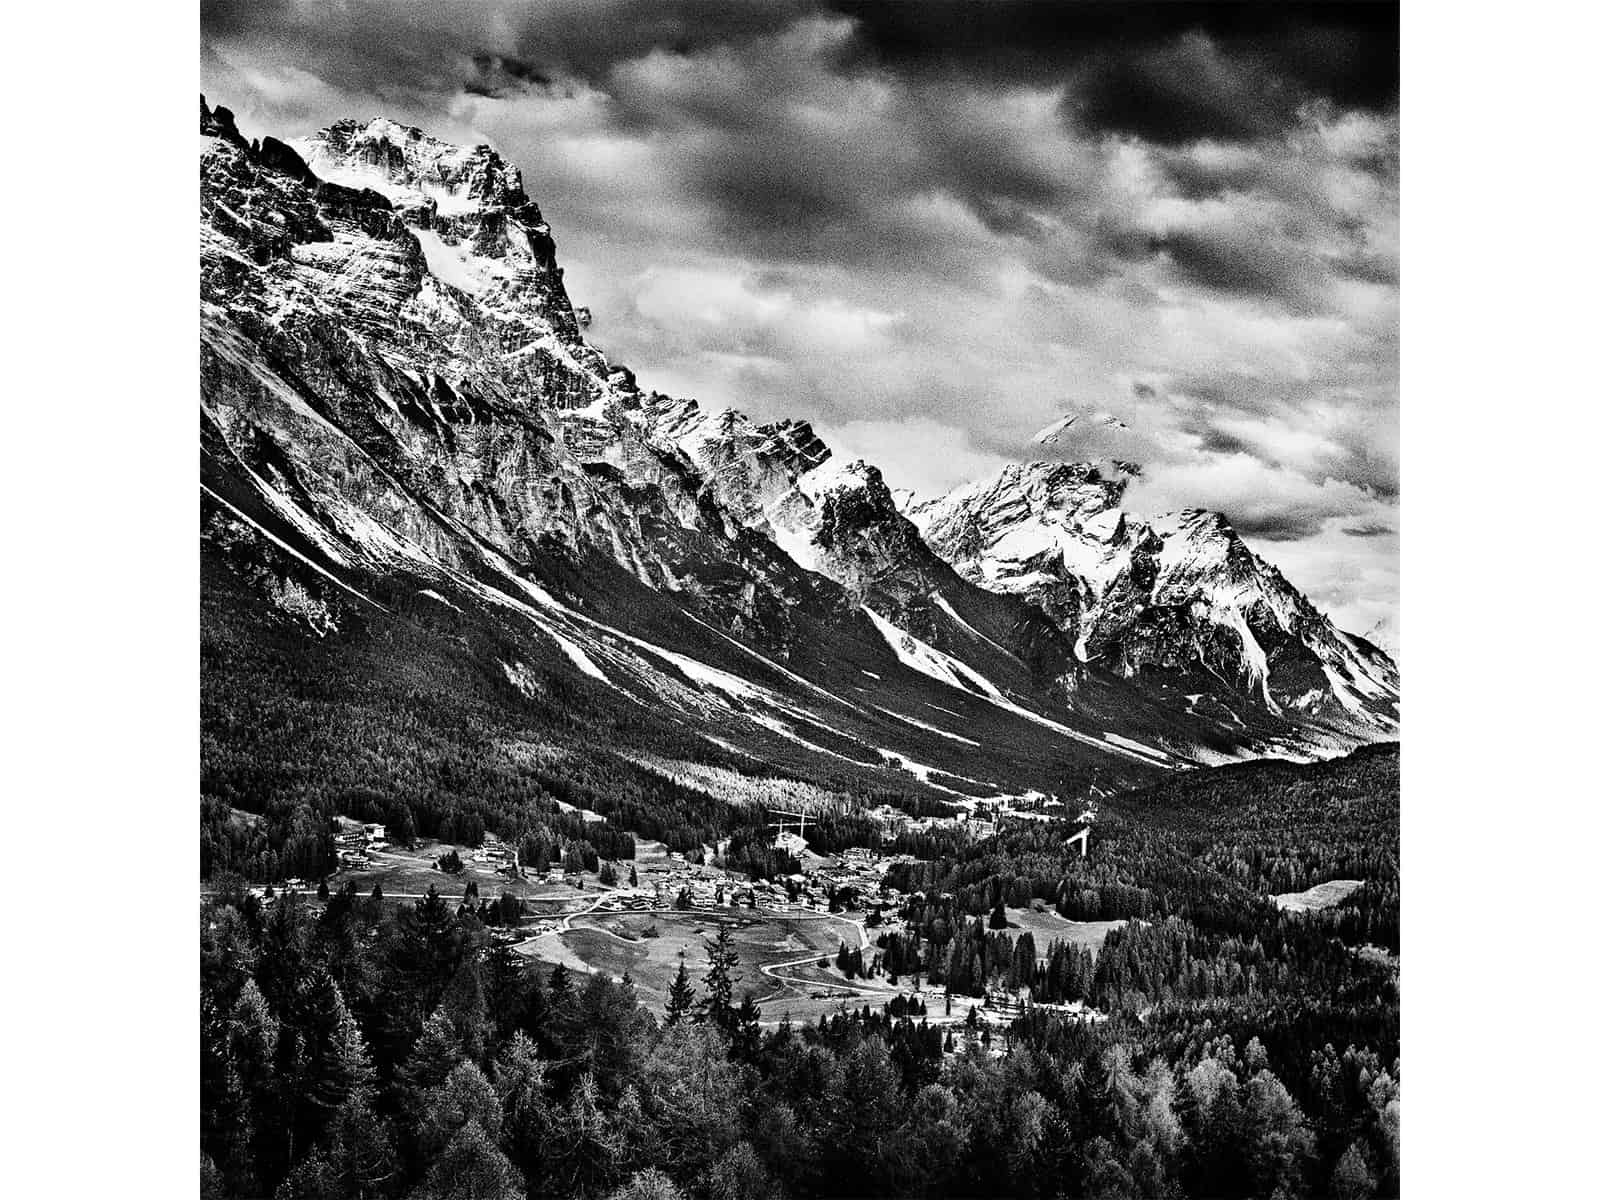 ID: A square, black and white image. The contrast is very high in this mountain image. In the foreground are alpine mountains that are snow capped. In the background there are more snow capped mountains. The clouds are dramatic in the sky.